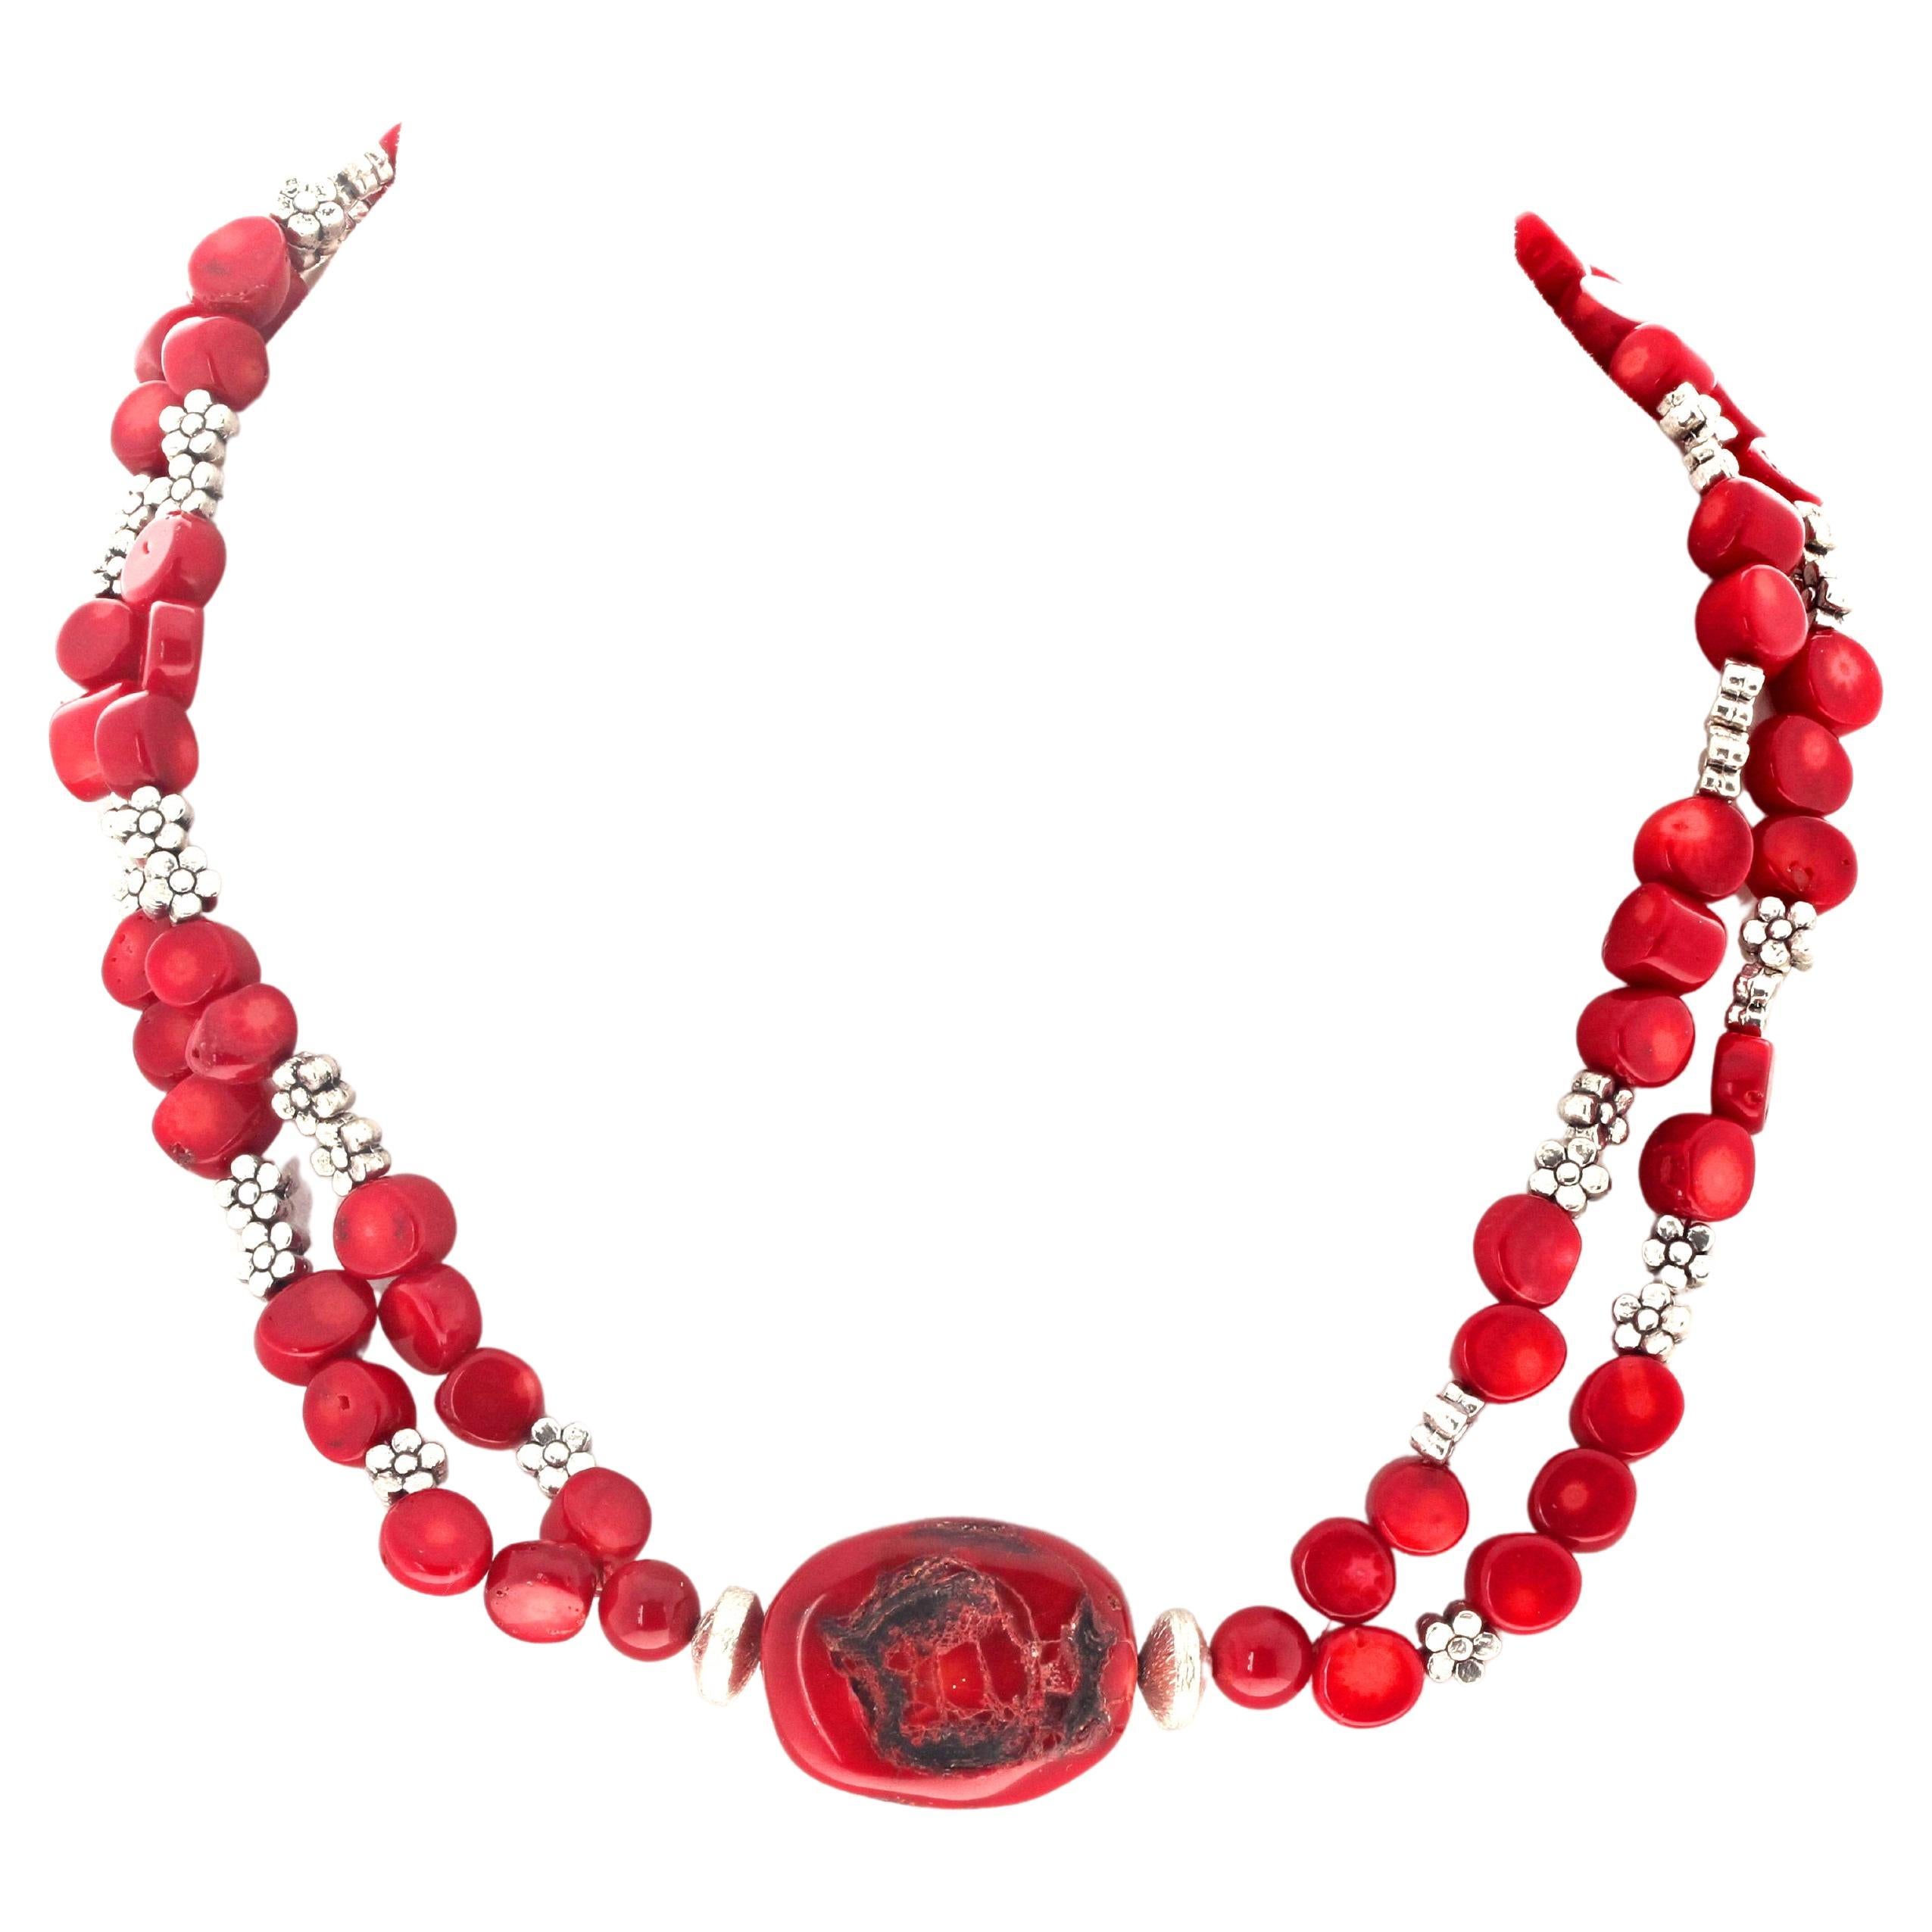 AJD Natural Artistic Red Coral & Silver Flowers 15 1/2" Double Strand Necklace (Collier double)